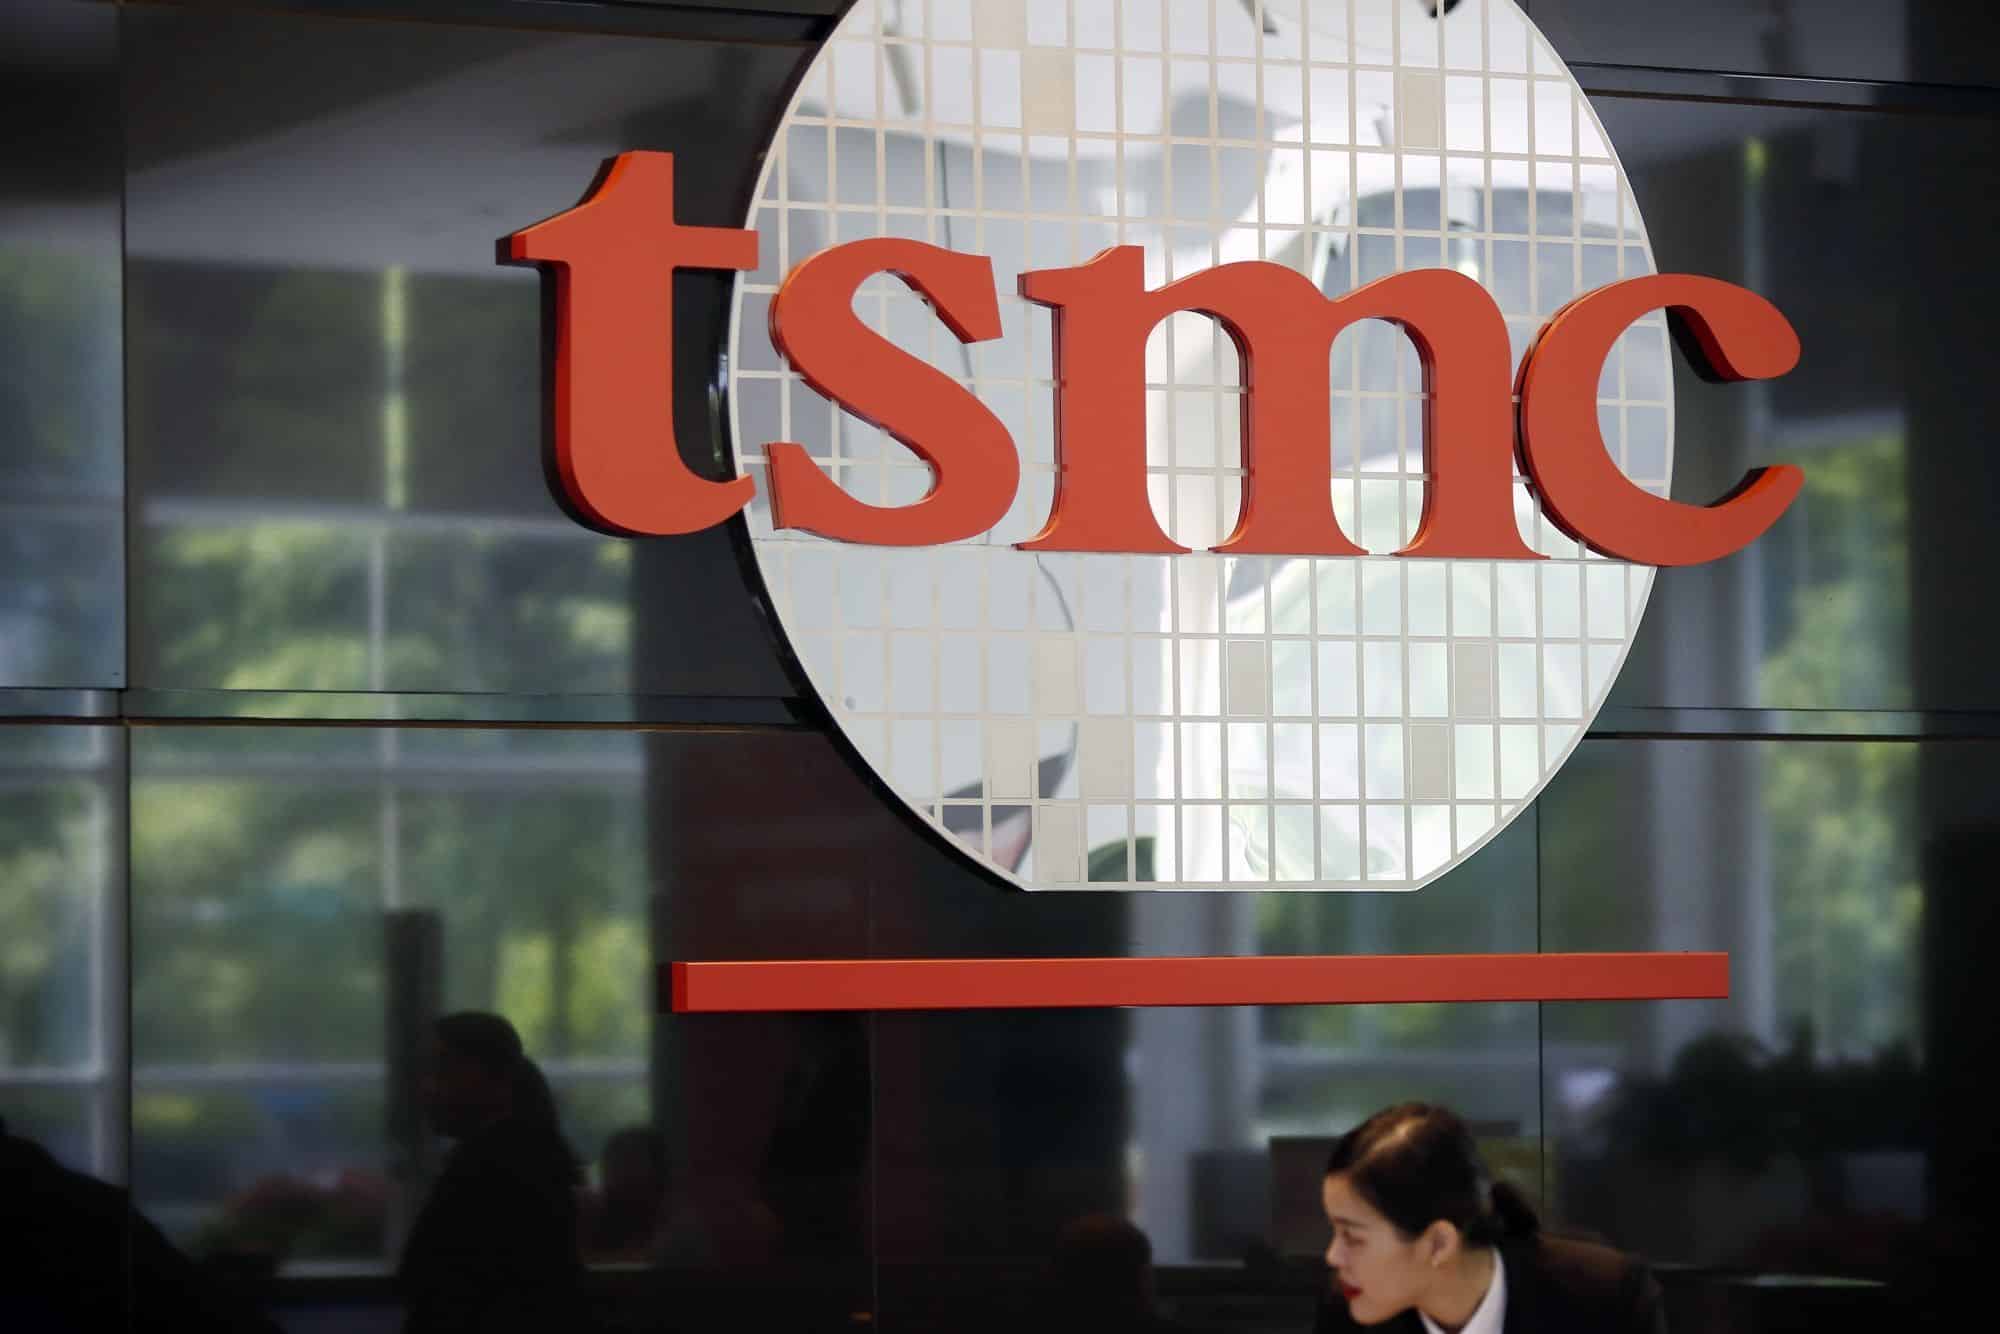 TSMC’s chip development schedule revealed: 3nm chips to enter mass production in 2022, 4nm chips next year